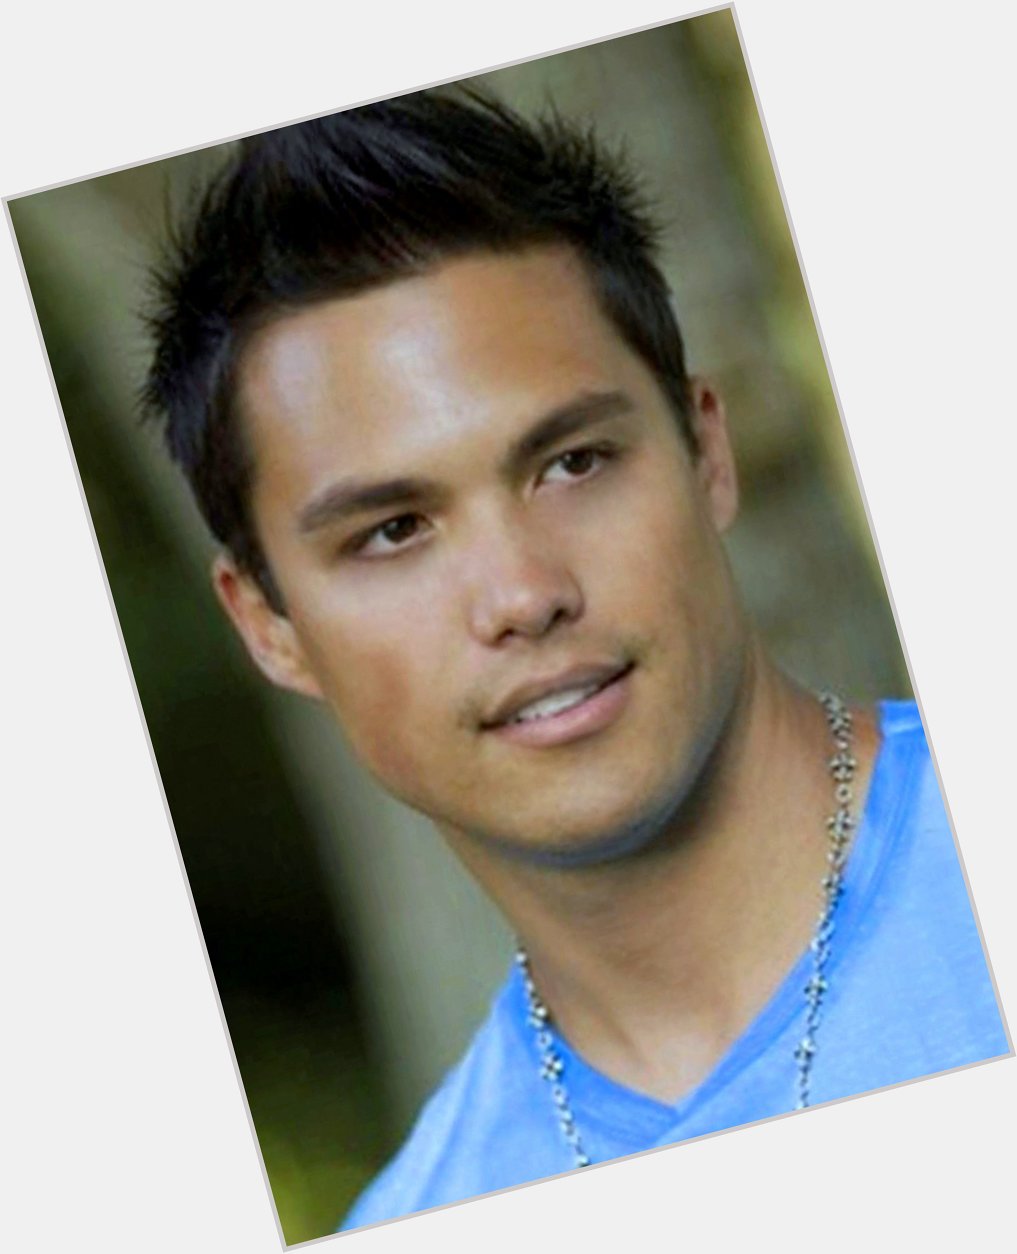 Michael Copon November 13 Sending Very Happy Birthday Wishes! Continued Success! 